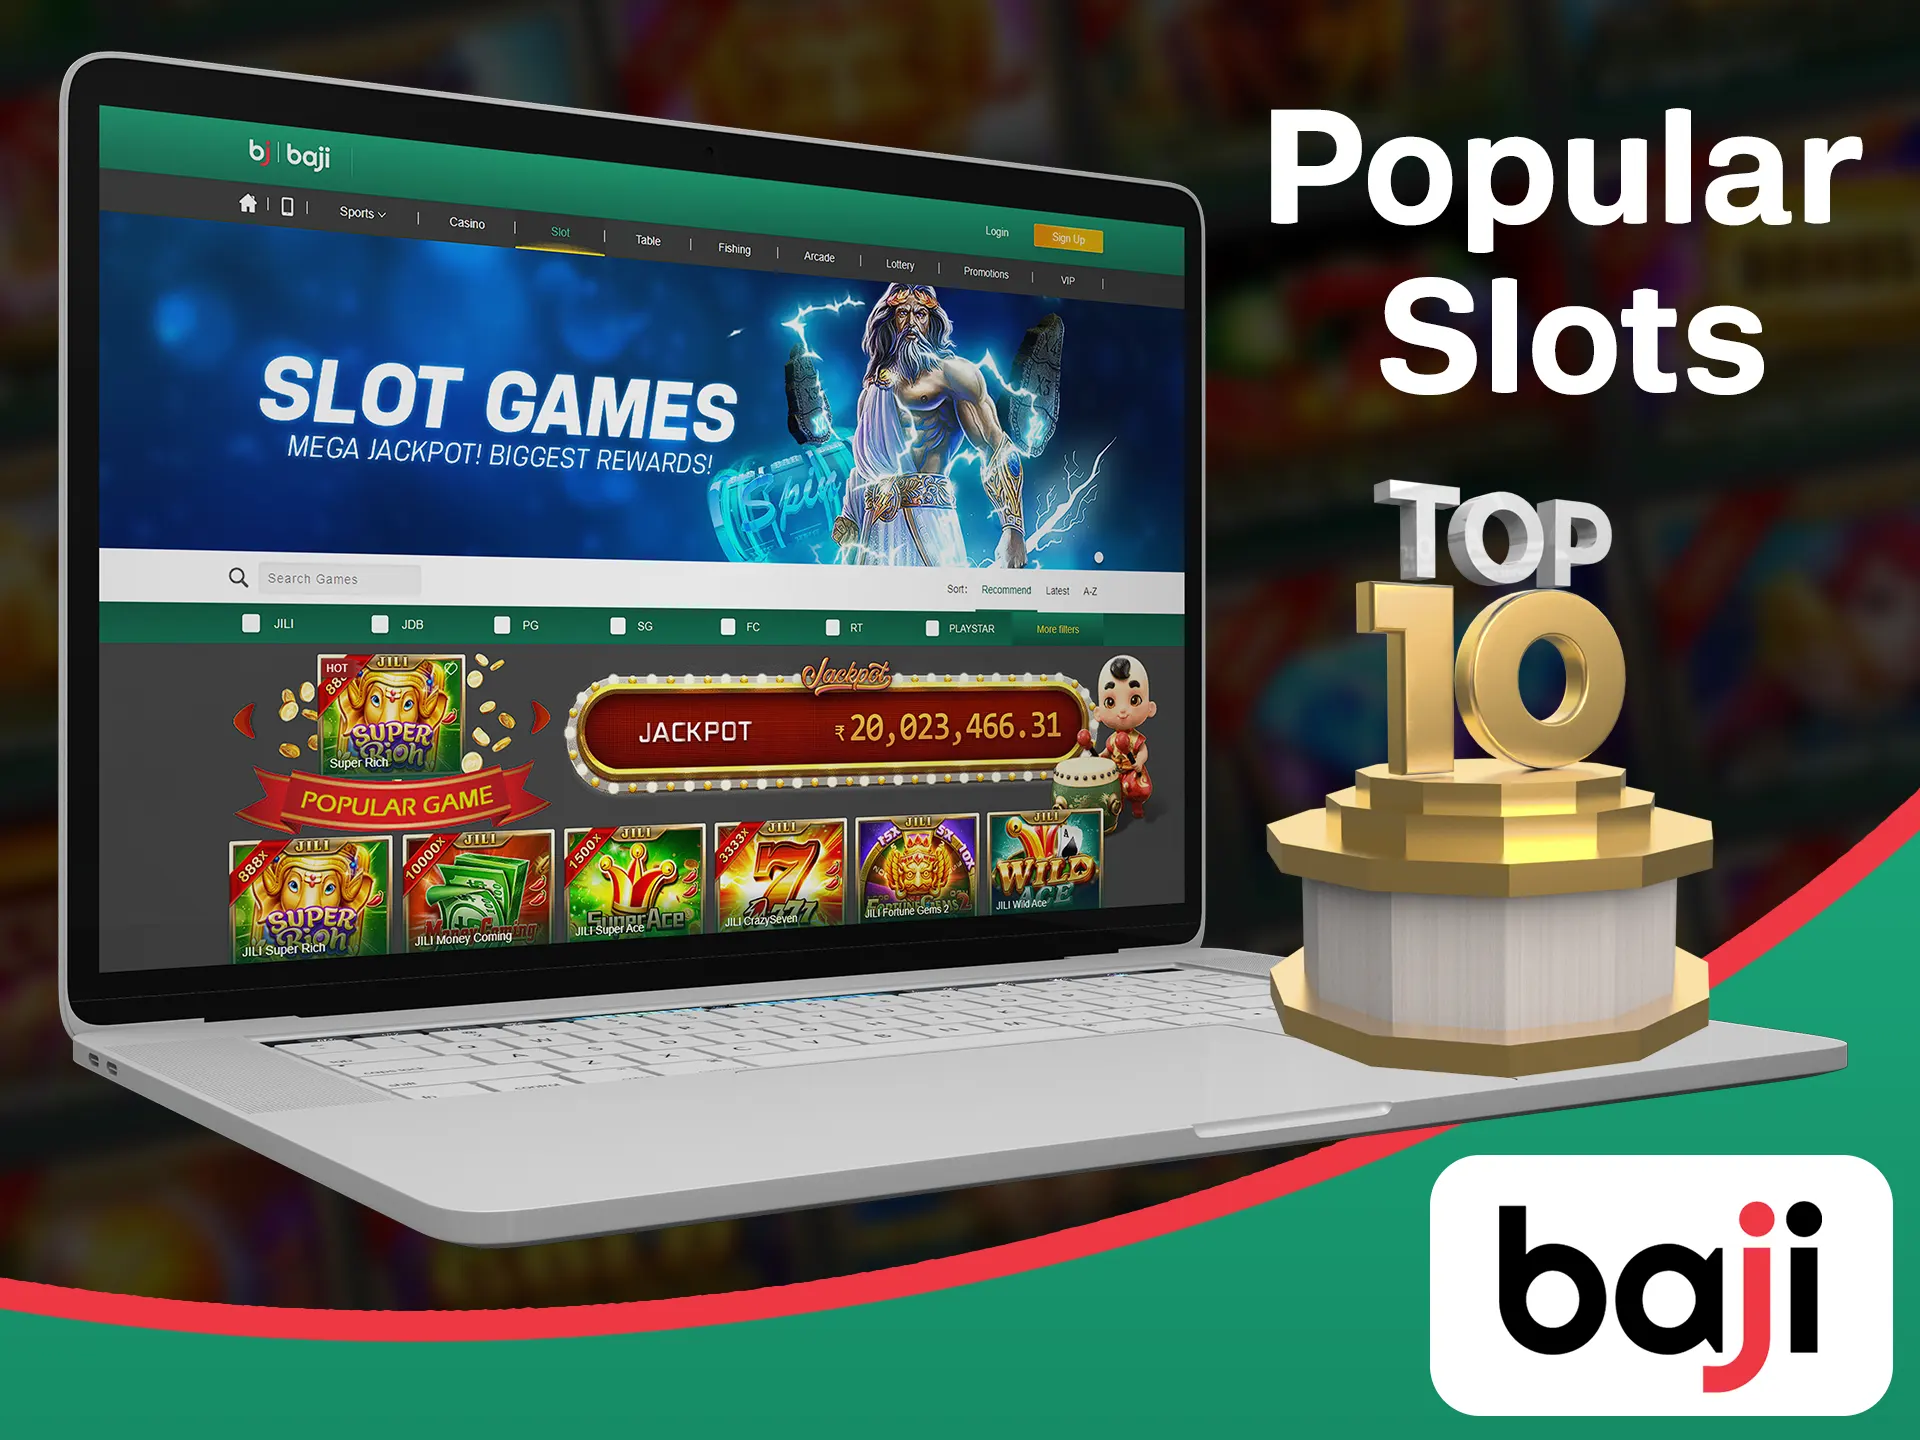 Spin the most popular slots on the Baji slots page.